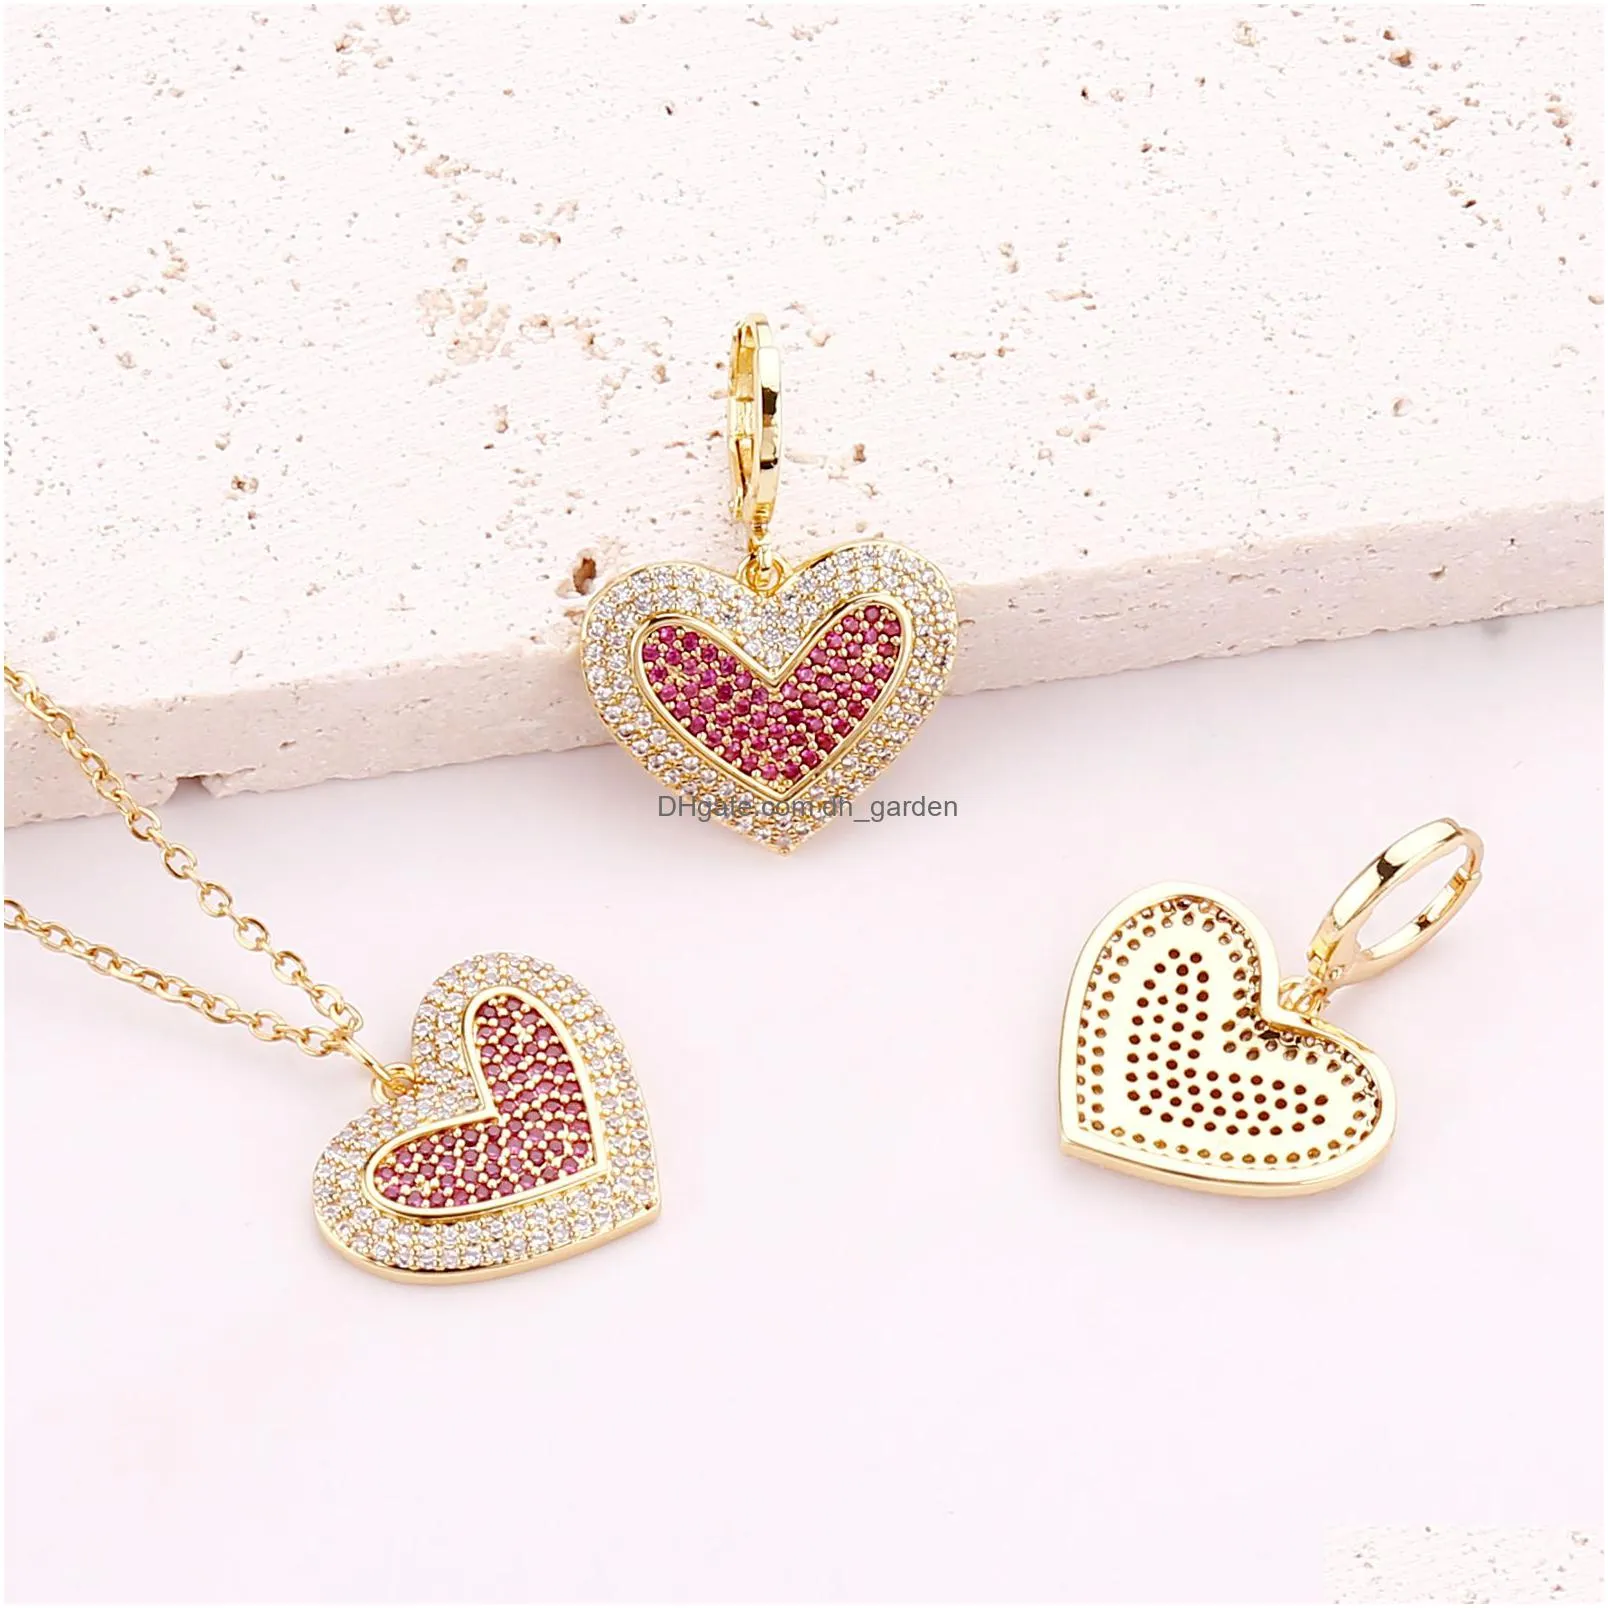 new arrival tiny heart necklace for women rose gold chain pendant necklace cute girl bohemia party choker jewelry gifts